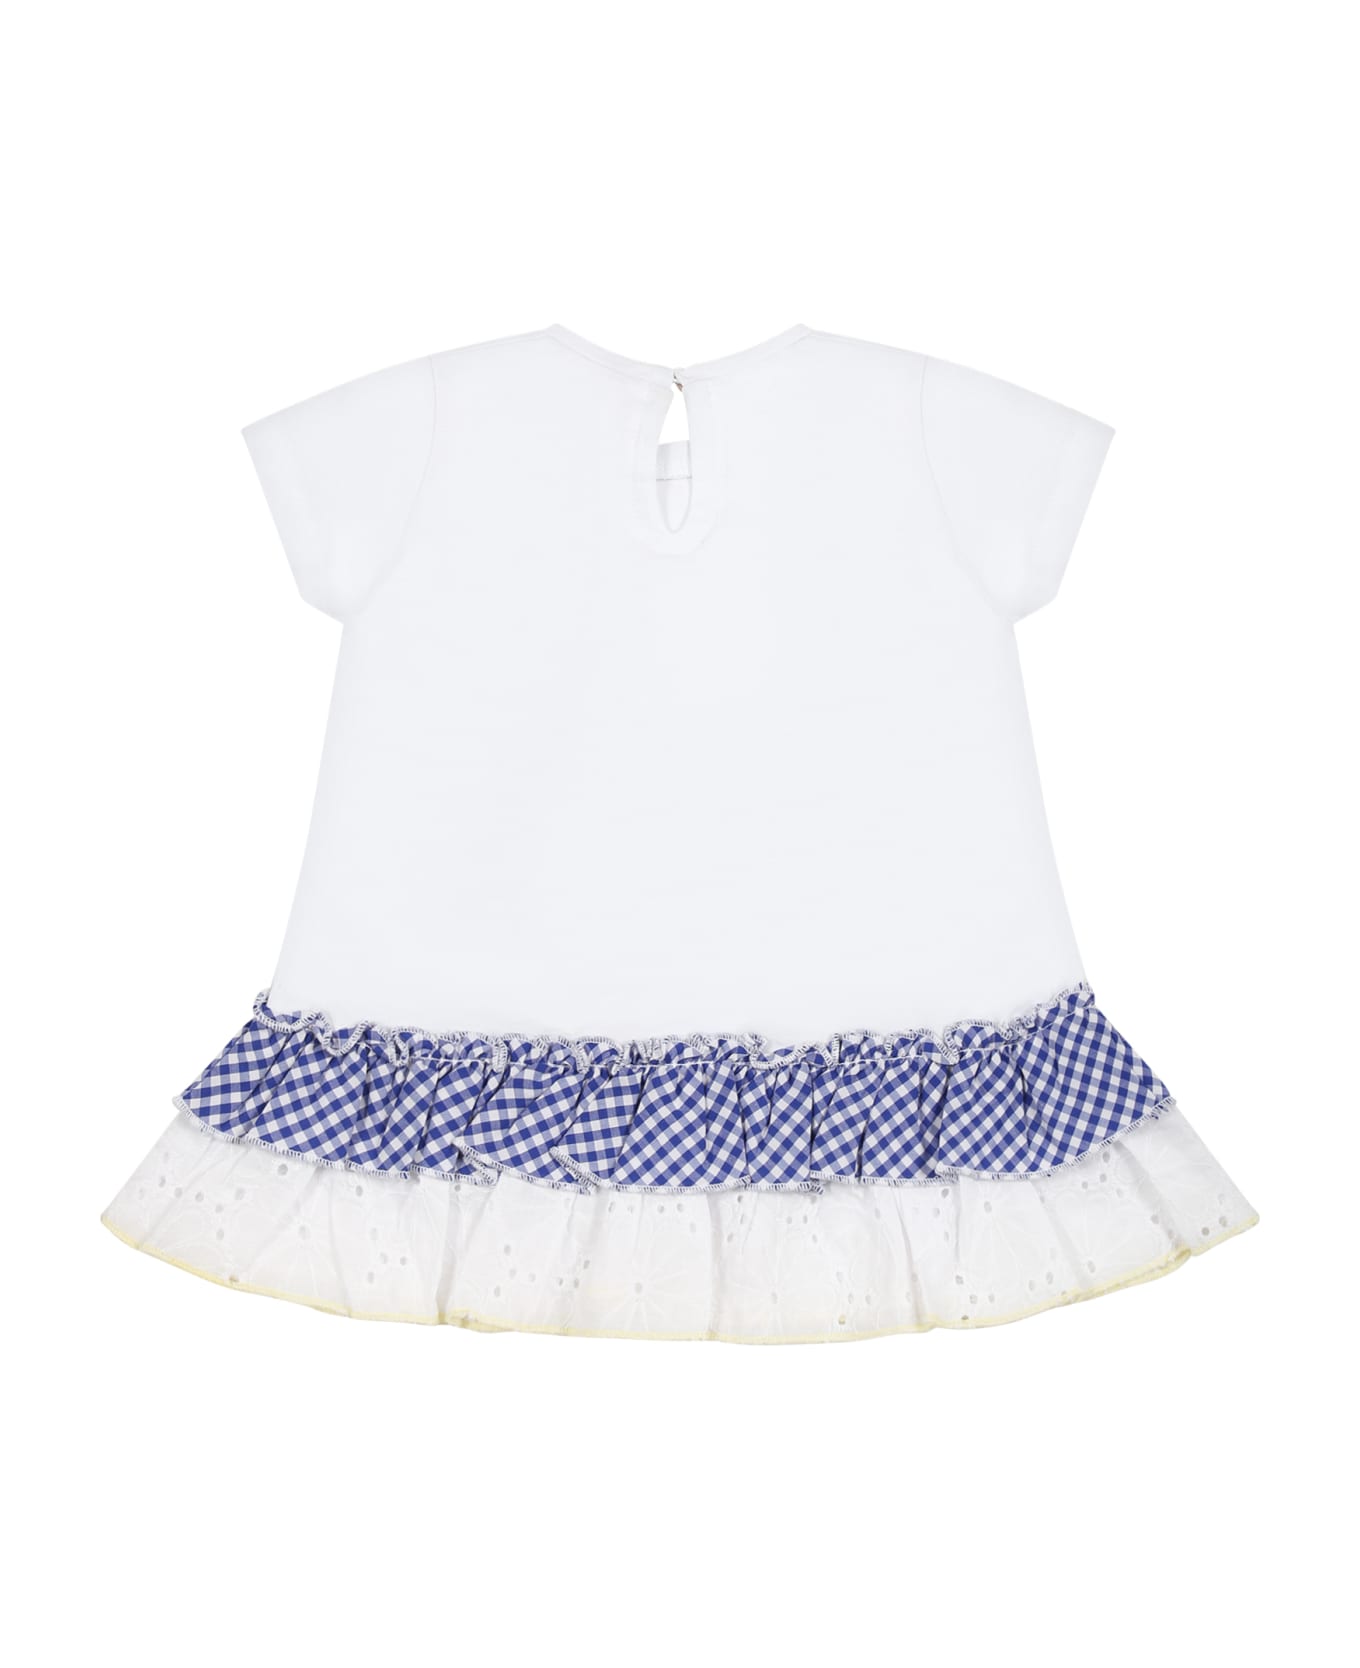 Monnalisa White T-shirt For Baby Girl With Tweety Print And Logo - White